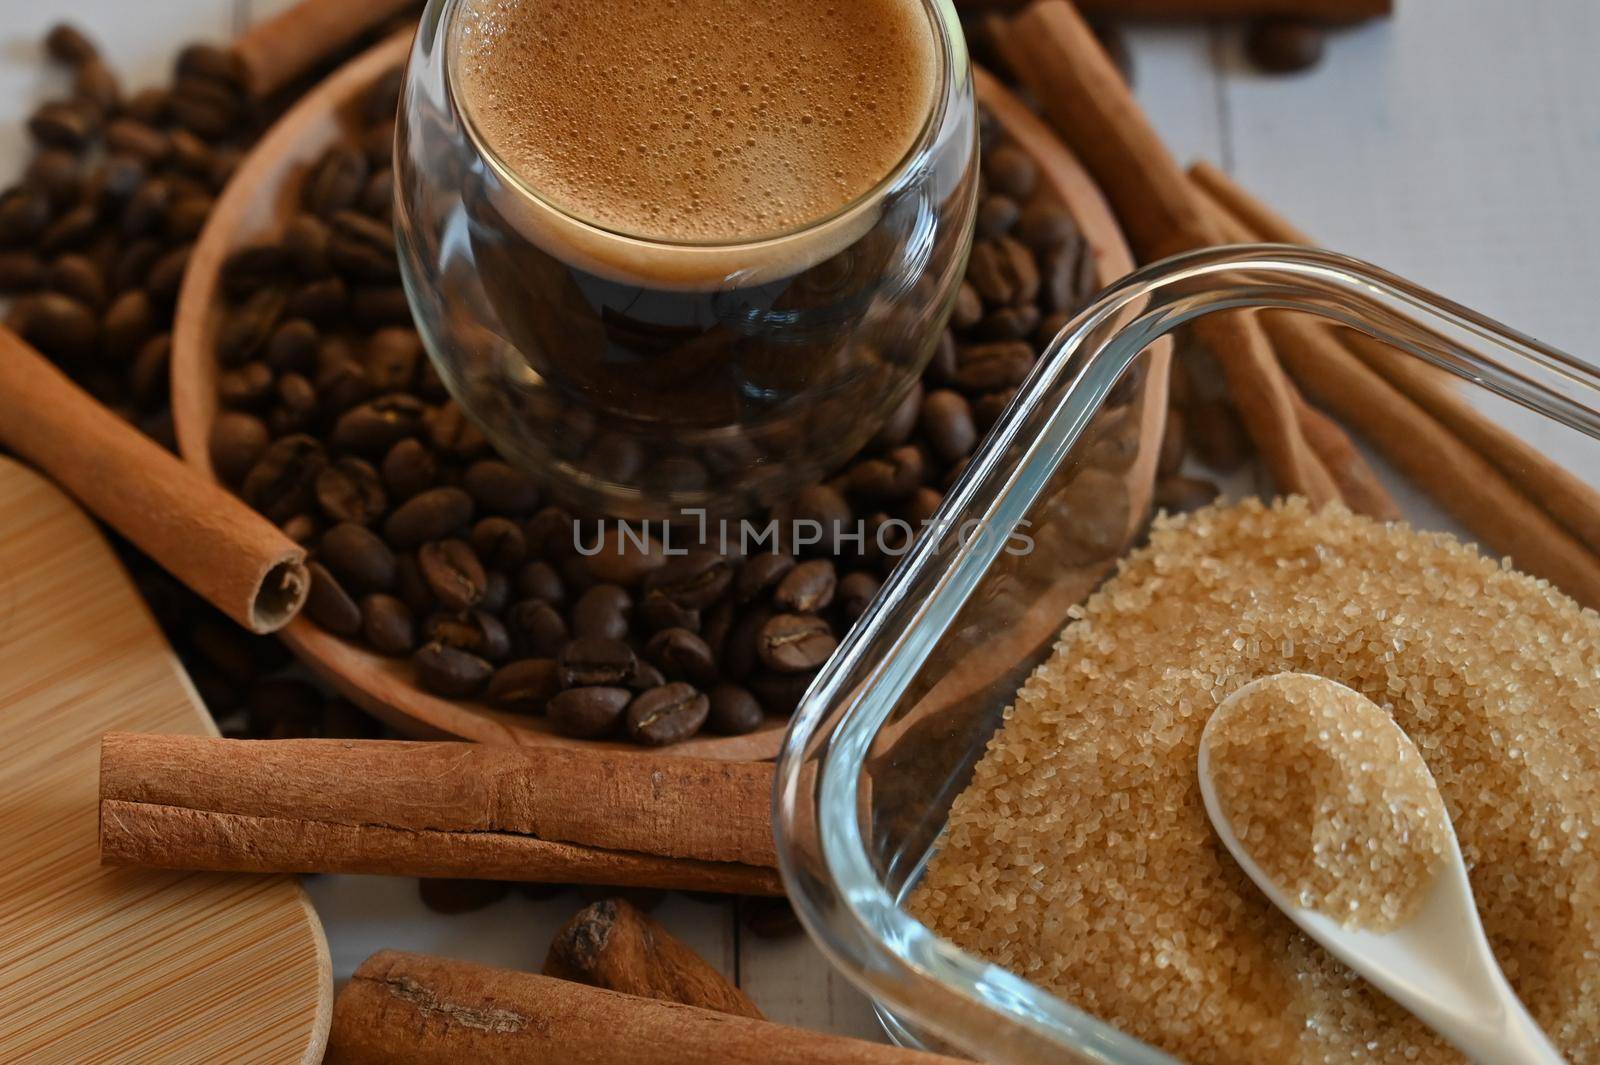 a glass glass stands on coffee beans in a wooden plate next to a sugar bowl with brown sugar close up